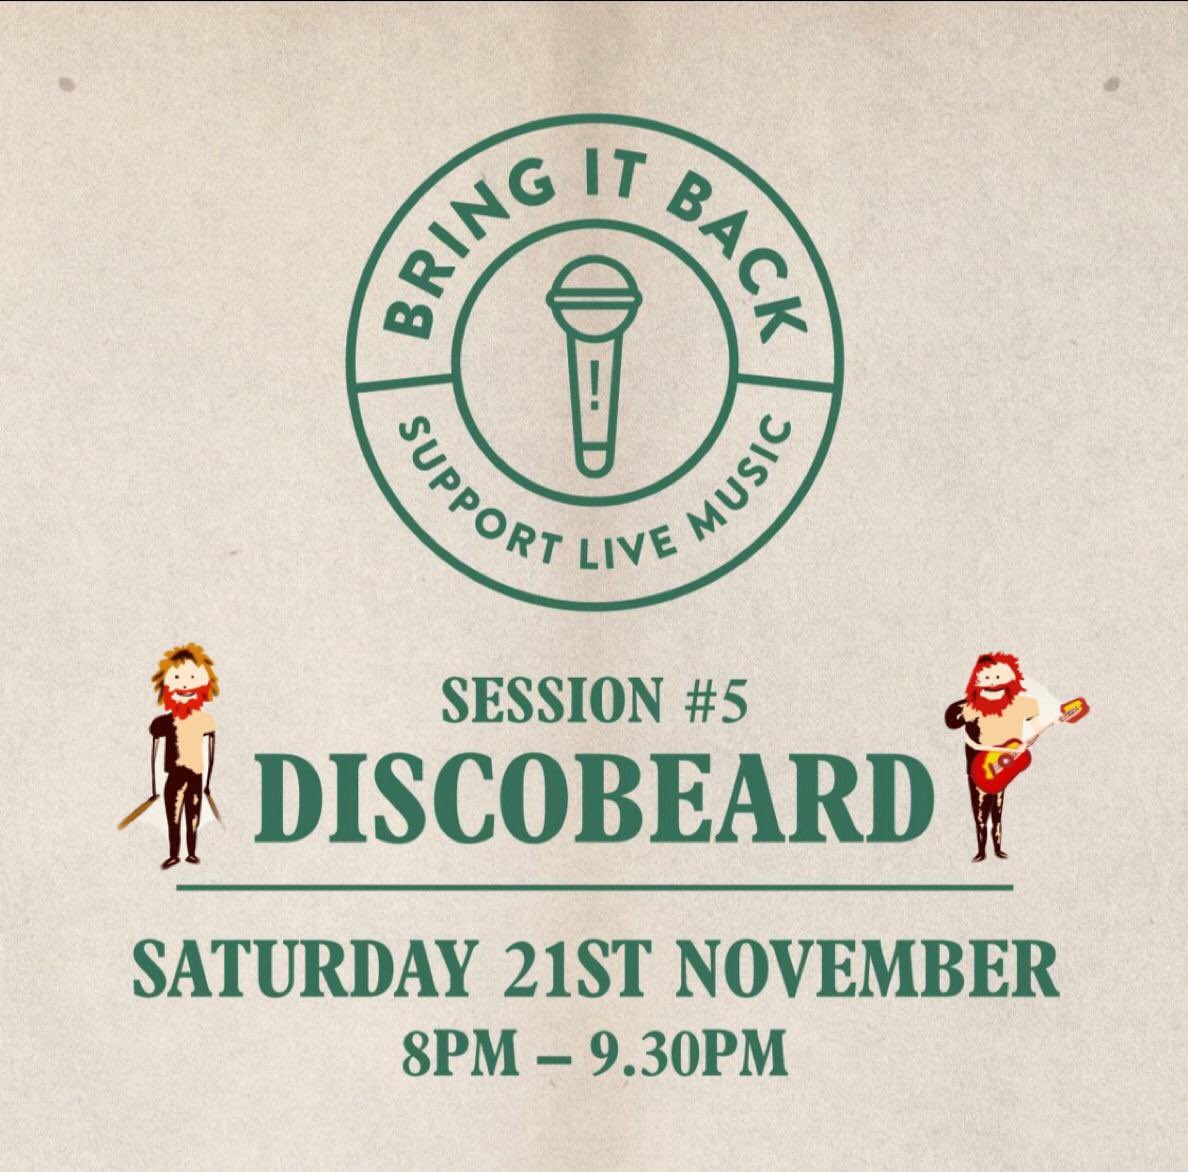 We hope you have enjoyed our live sessions as much as we have. Thank you again for your support! Our next act needs no introduction. @Discobeardmusic will be bringing the tunes this Saturday! (Live on our Facebook page). Who's in??